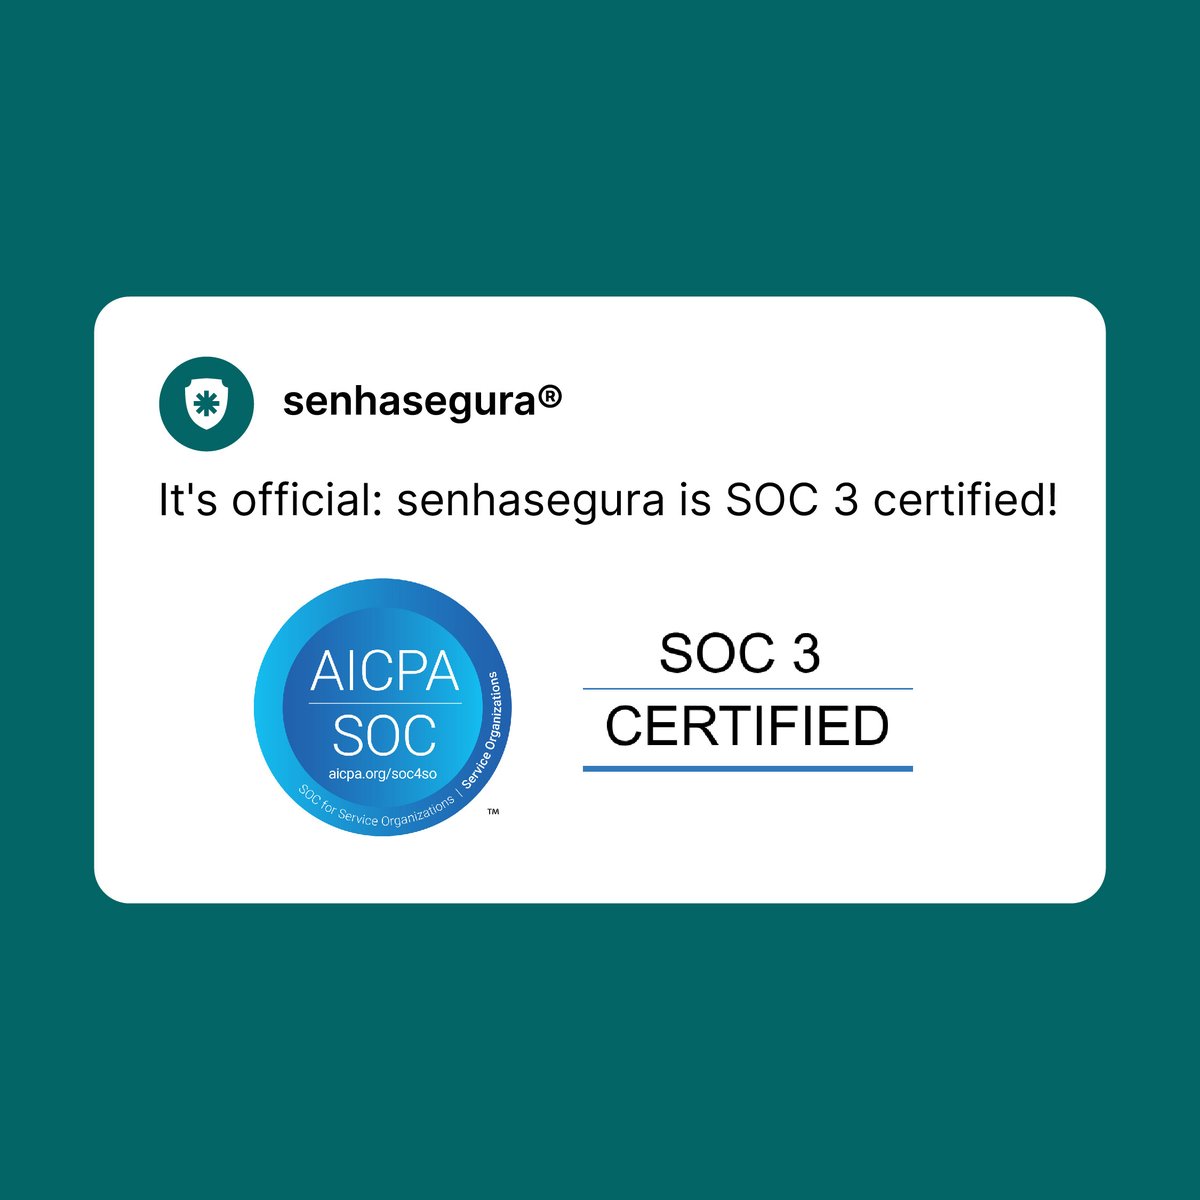 It's official: senhasegura is SOC 3 certified!

With SOC 3 now added to SOC 2, we're reinforcing our position as leaders in information security in the market.

Check out more details on our Trust Center: 
hubs.ly/Q02x9tCc0 

#CyberSecurity #SOC2 #SOC3 #senhasegura